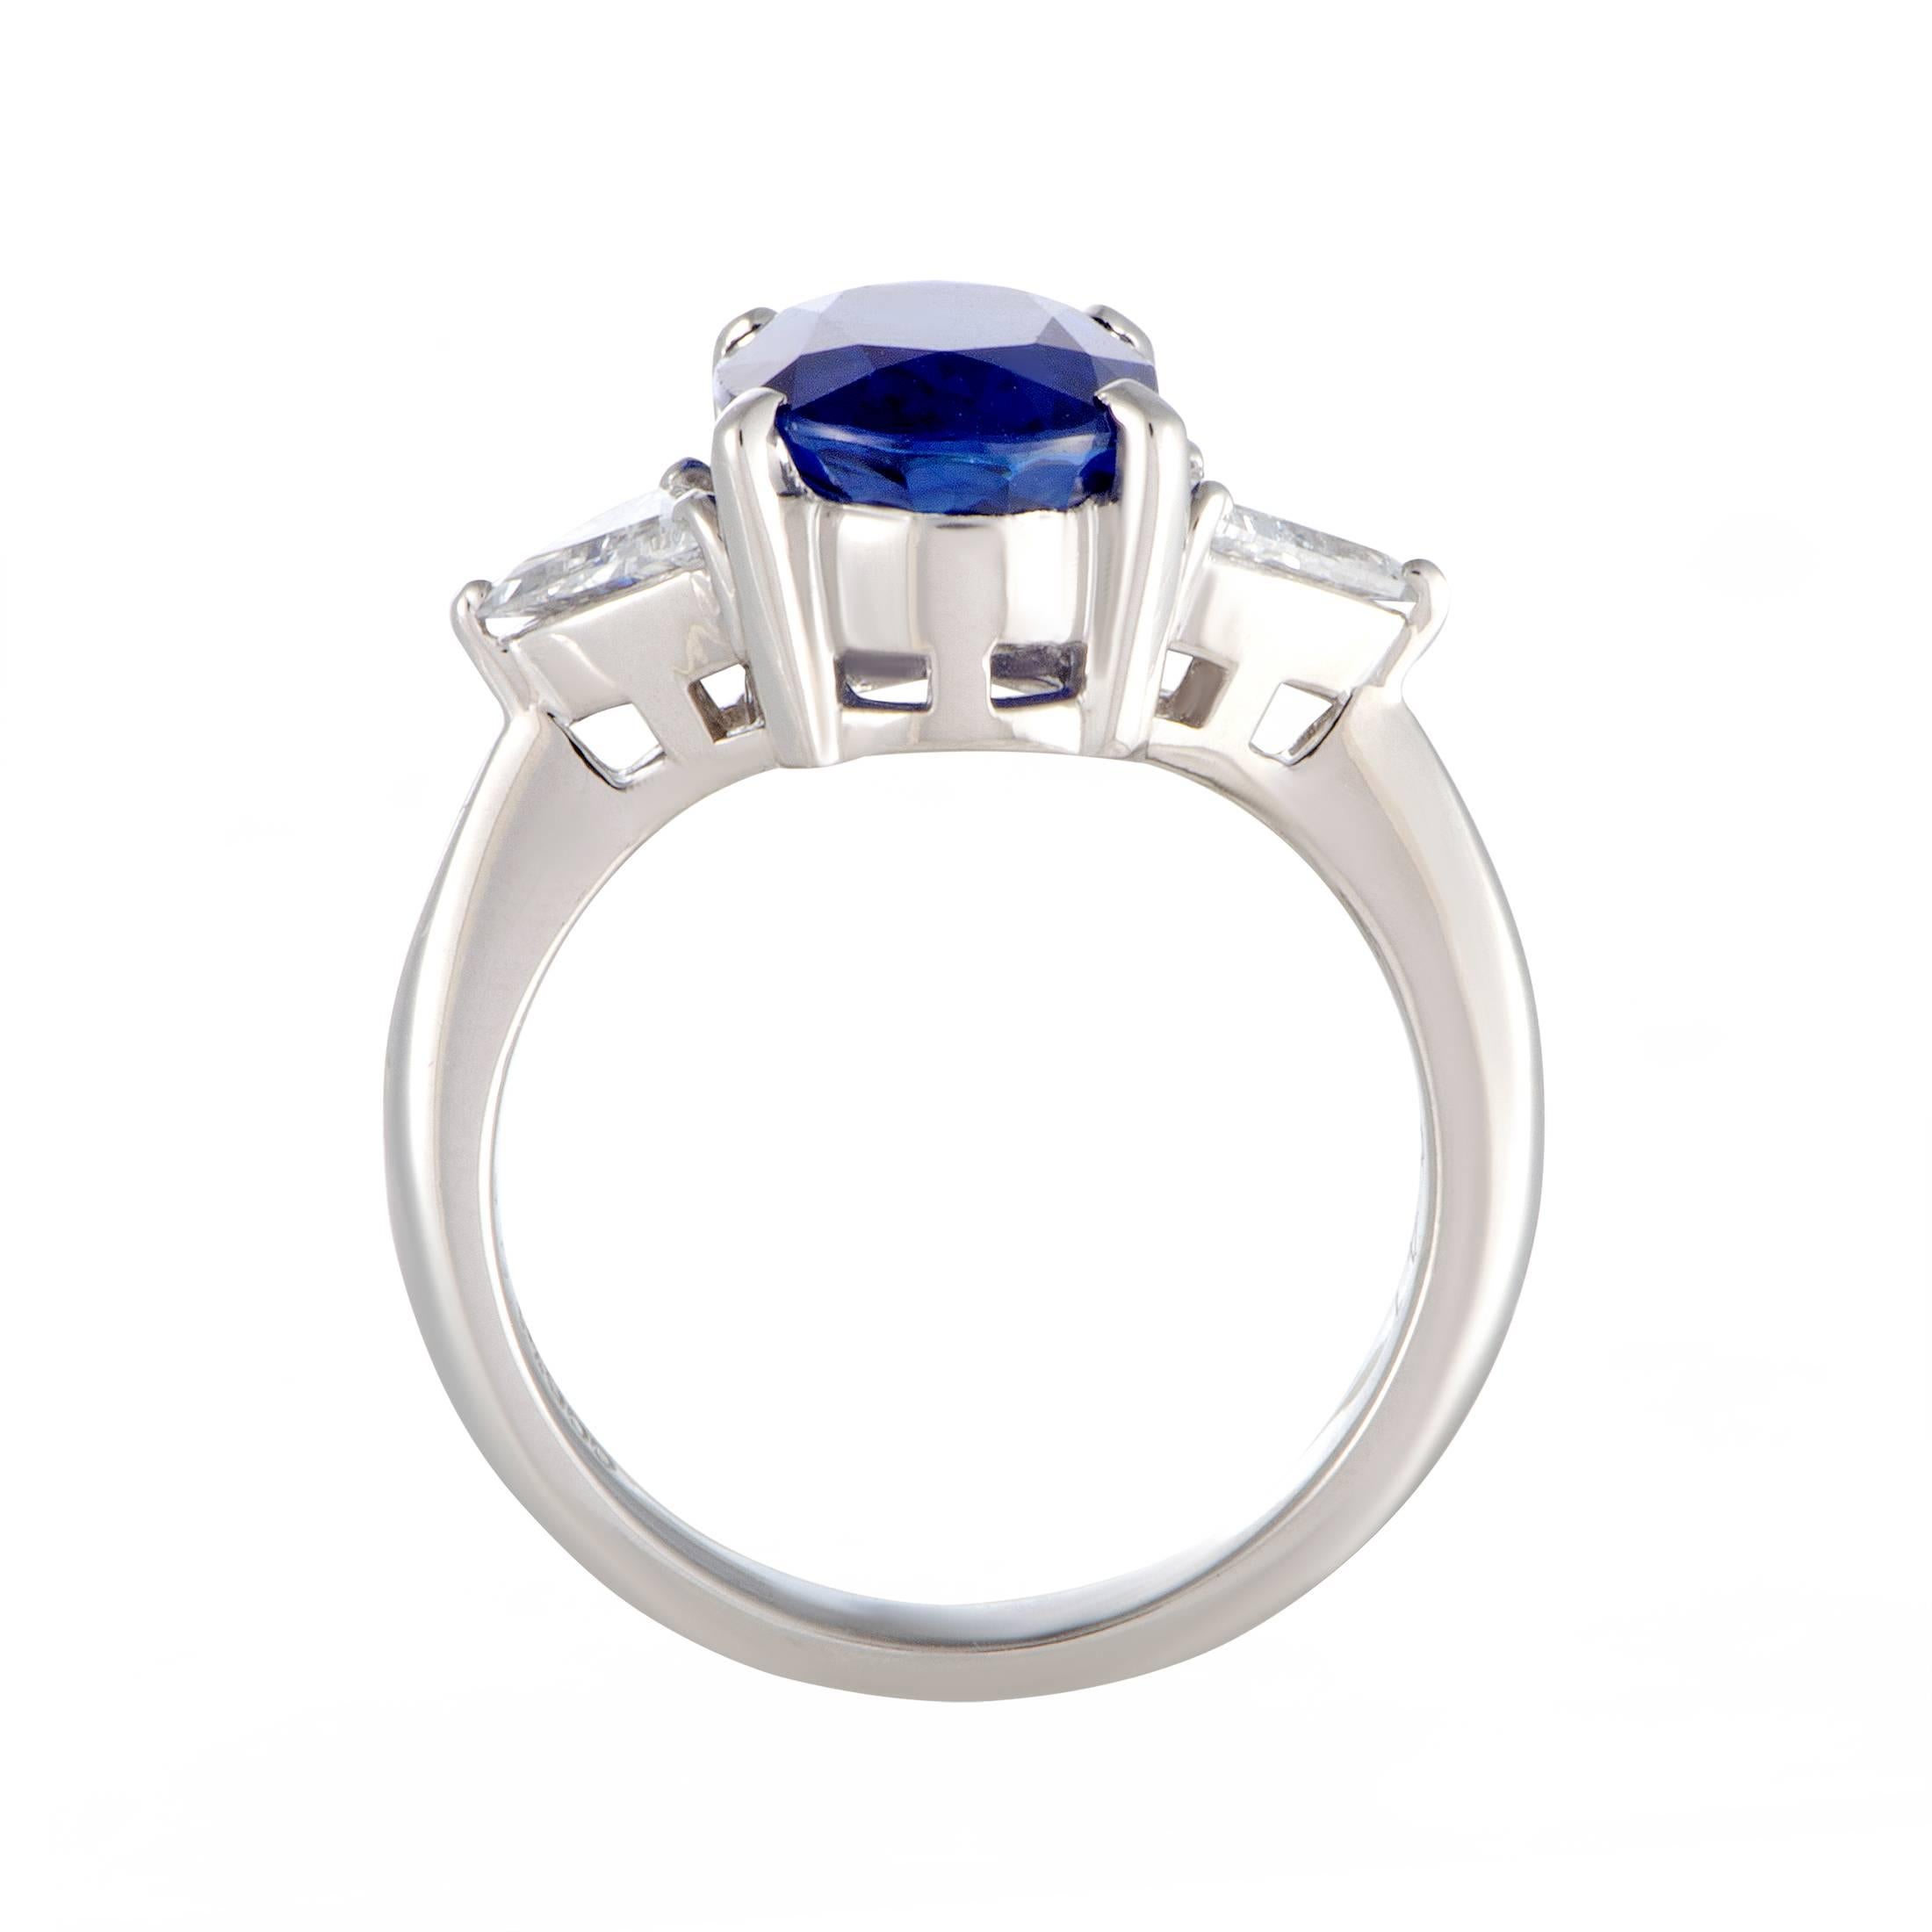 Made of prestigious platinum and set with a captivating sapphire complemented by scintillating diamonds, this sublime ring exudes elegance and refinement. The sapphire weighs 4.05 carats and the diamonds total 0.41 carats.
Ring Size: 5.75
Ring Top